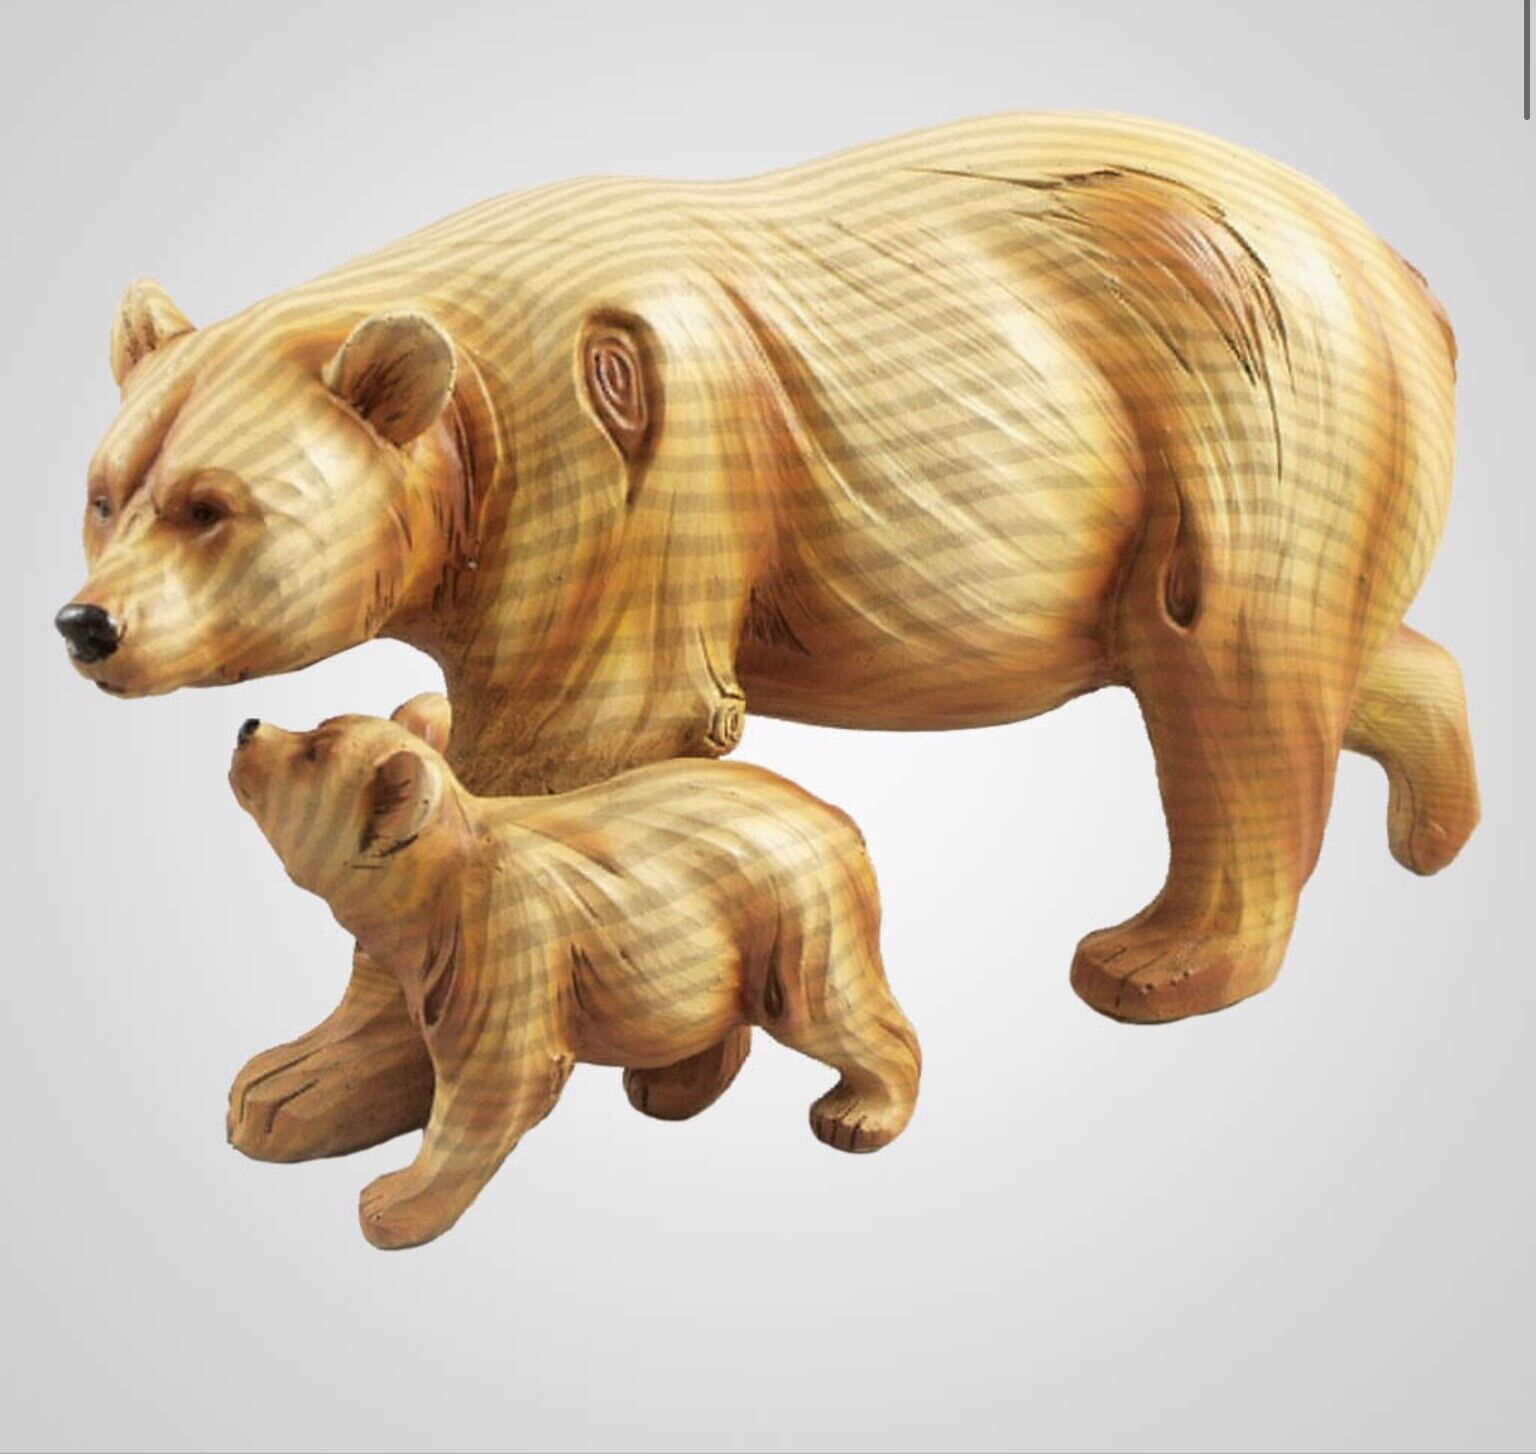 Carved BEAR WITH BABY FIGURINE.